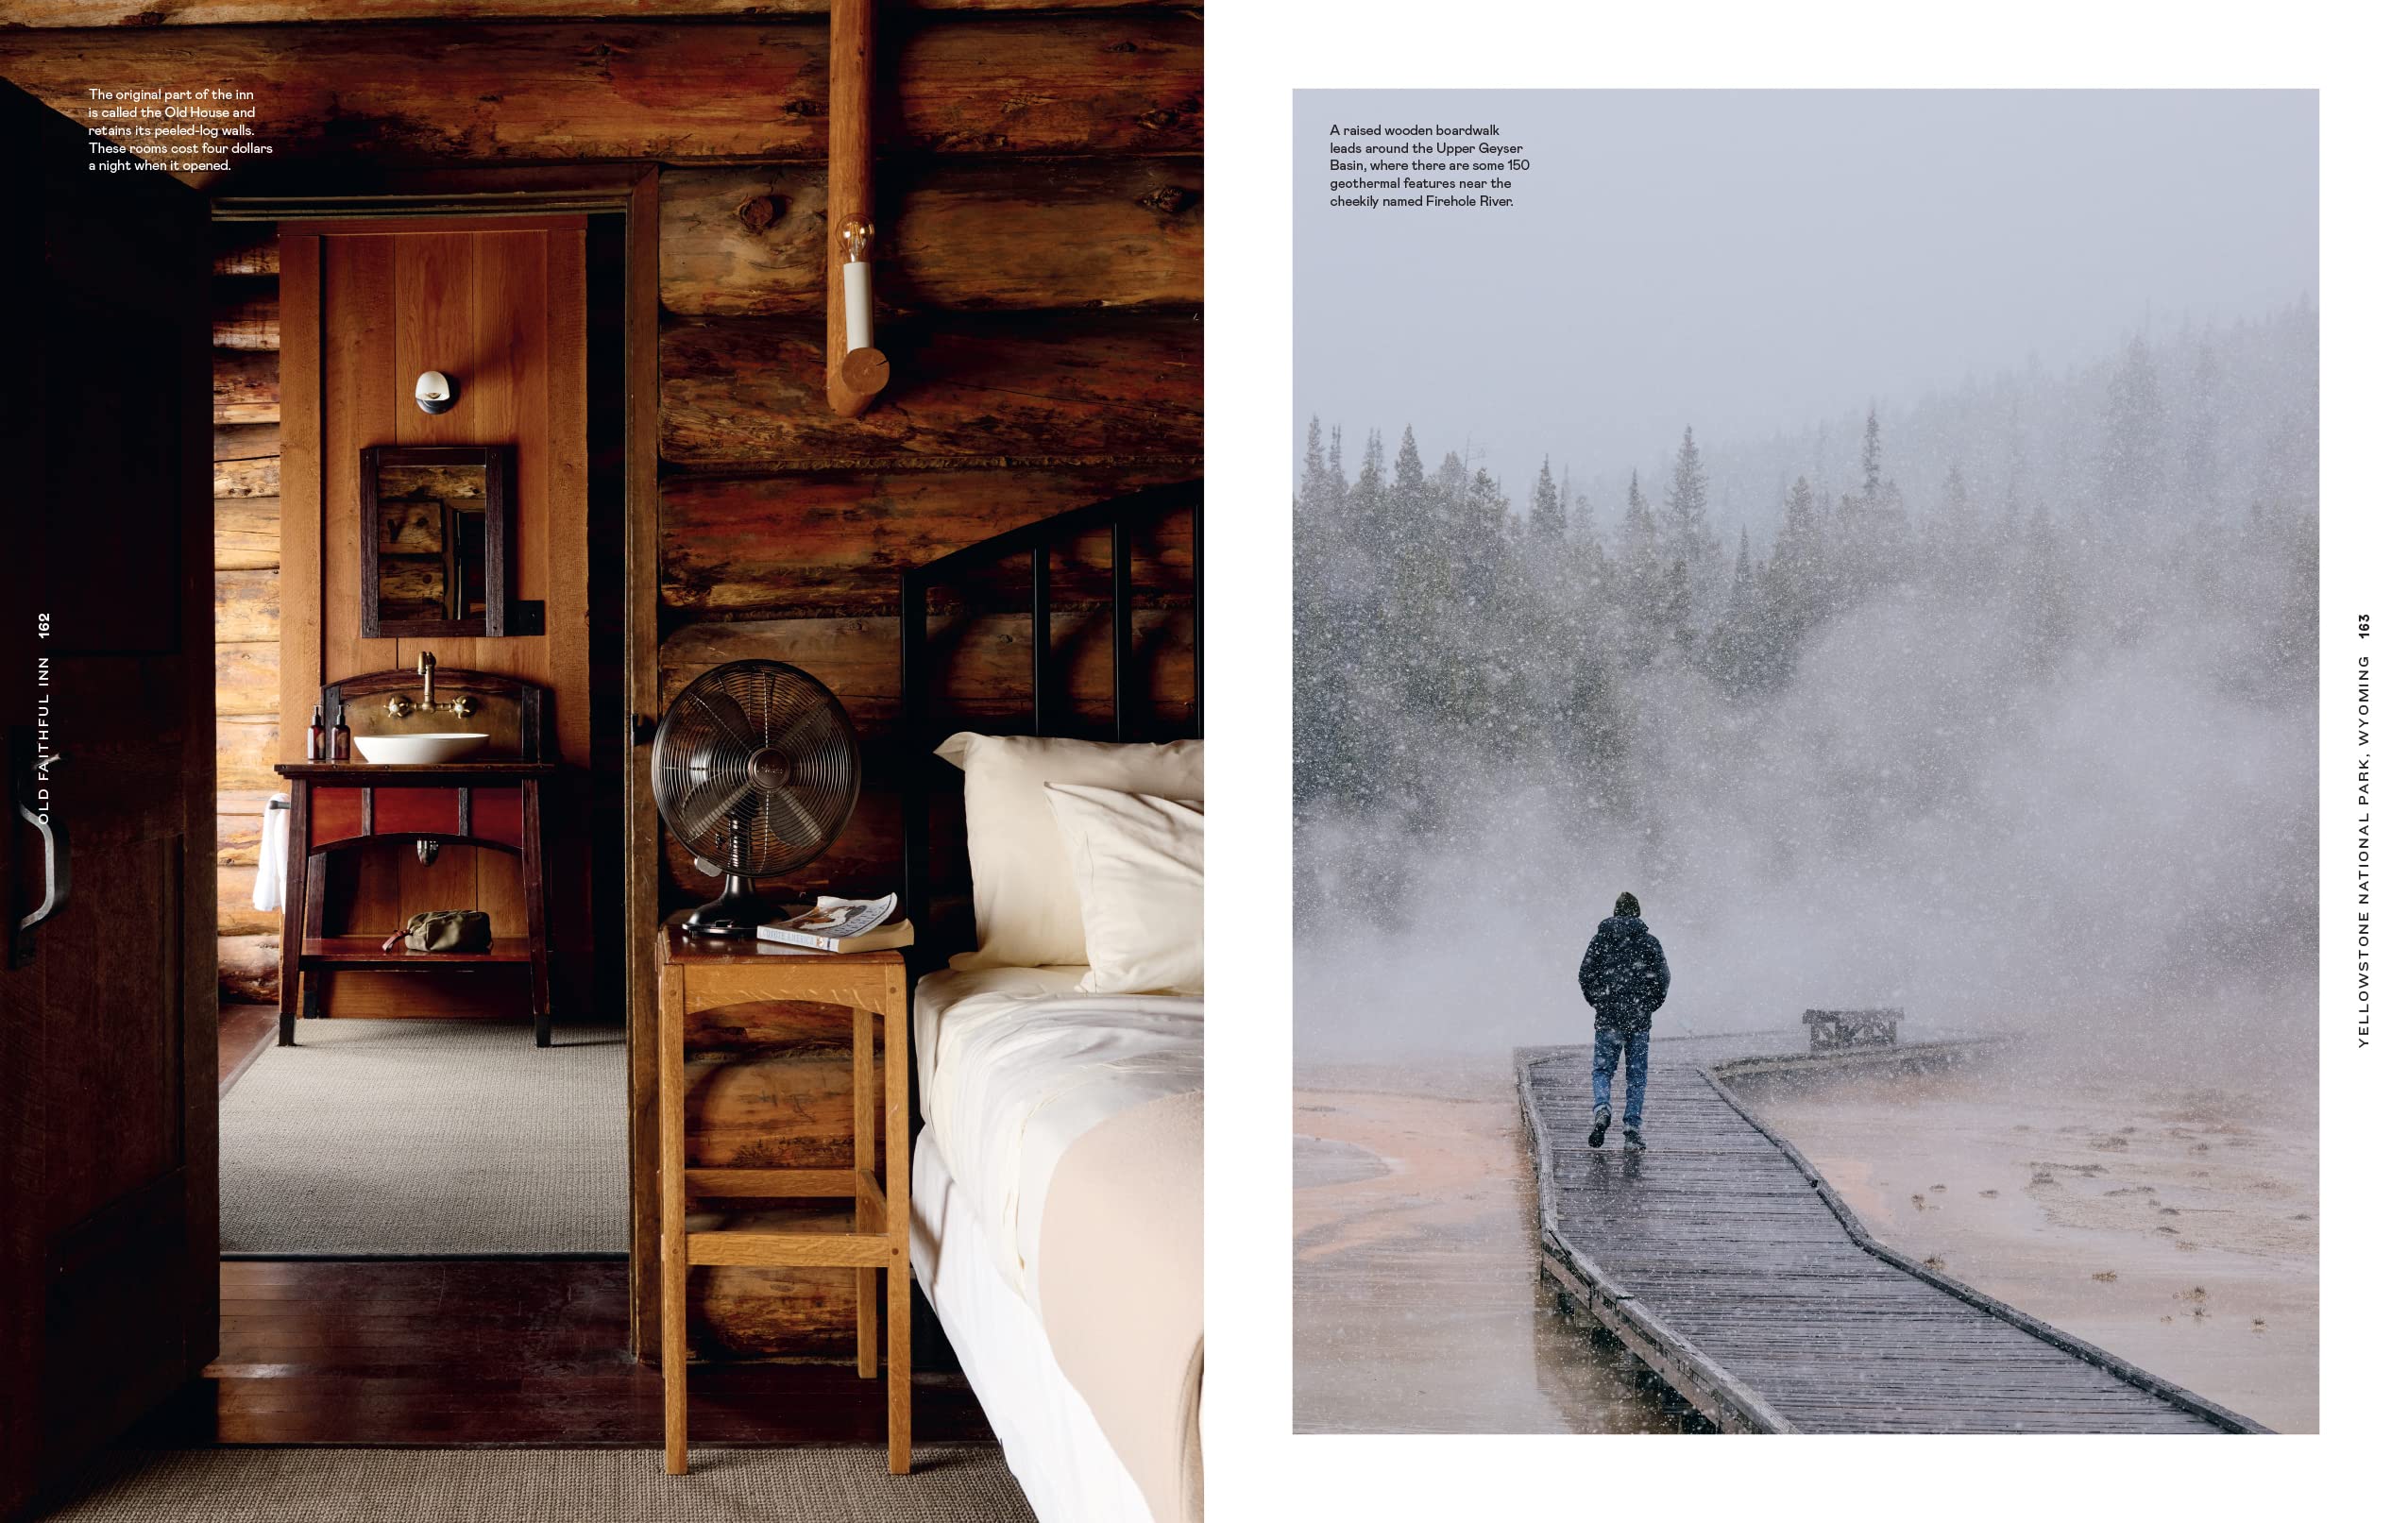 Lodge: An Indoorsy Tour of America’s National Parks by Max Humphrey &amp; Kathryn O’Shea-Evans